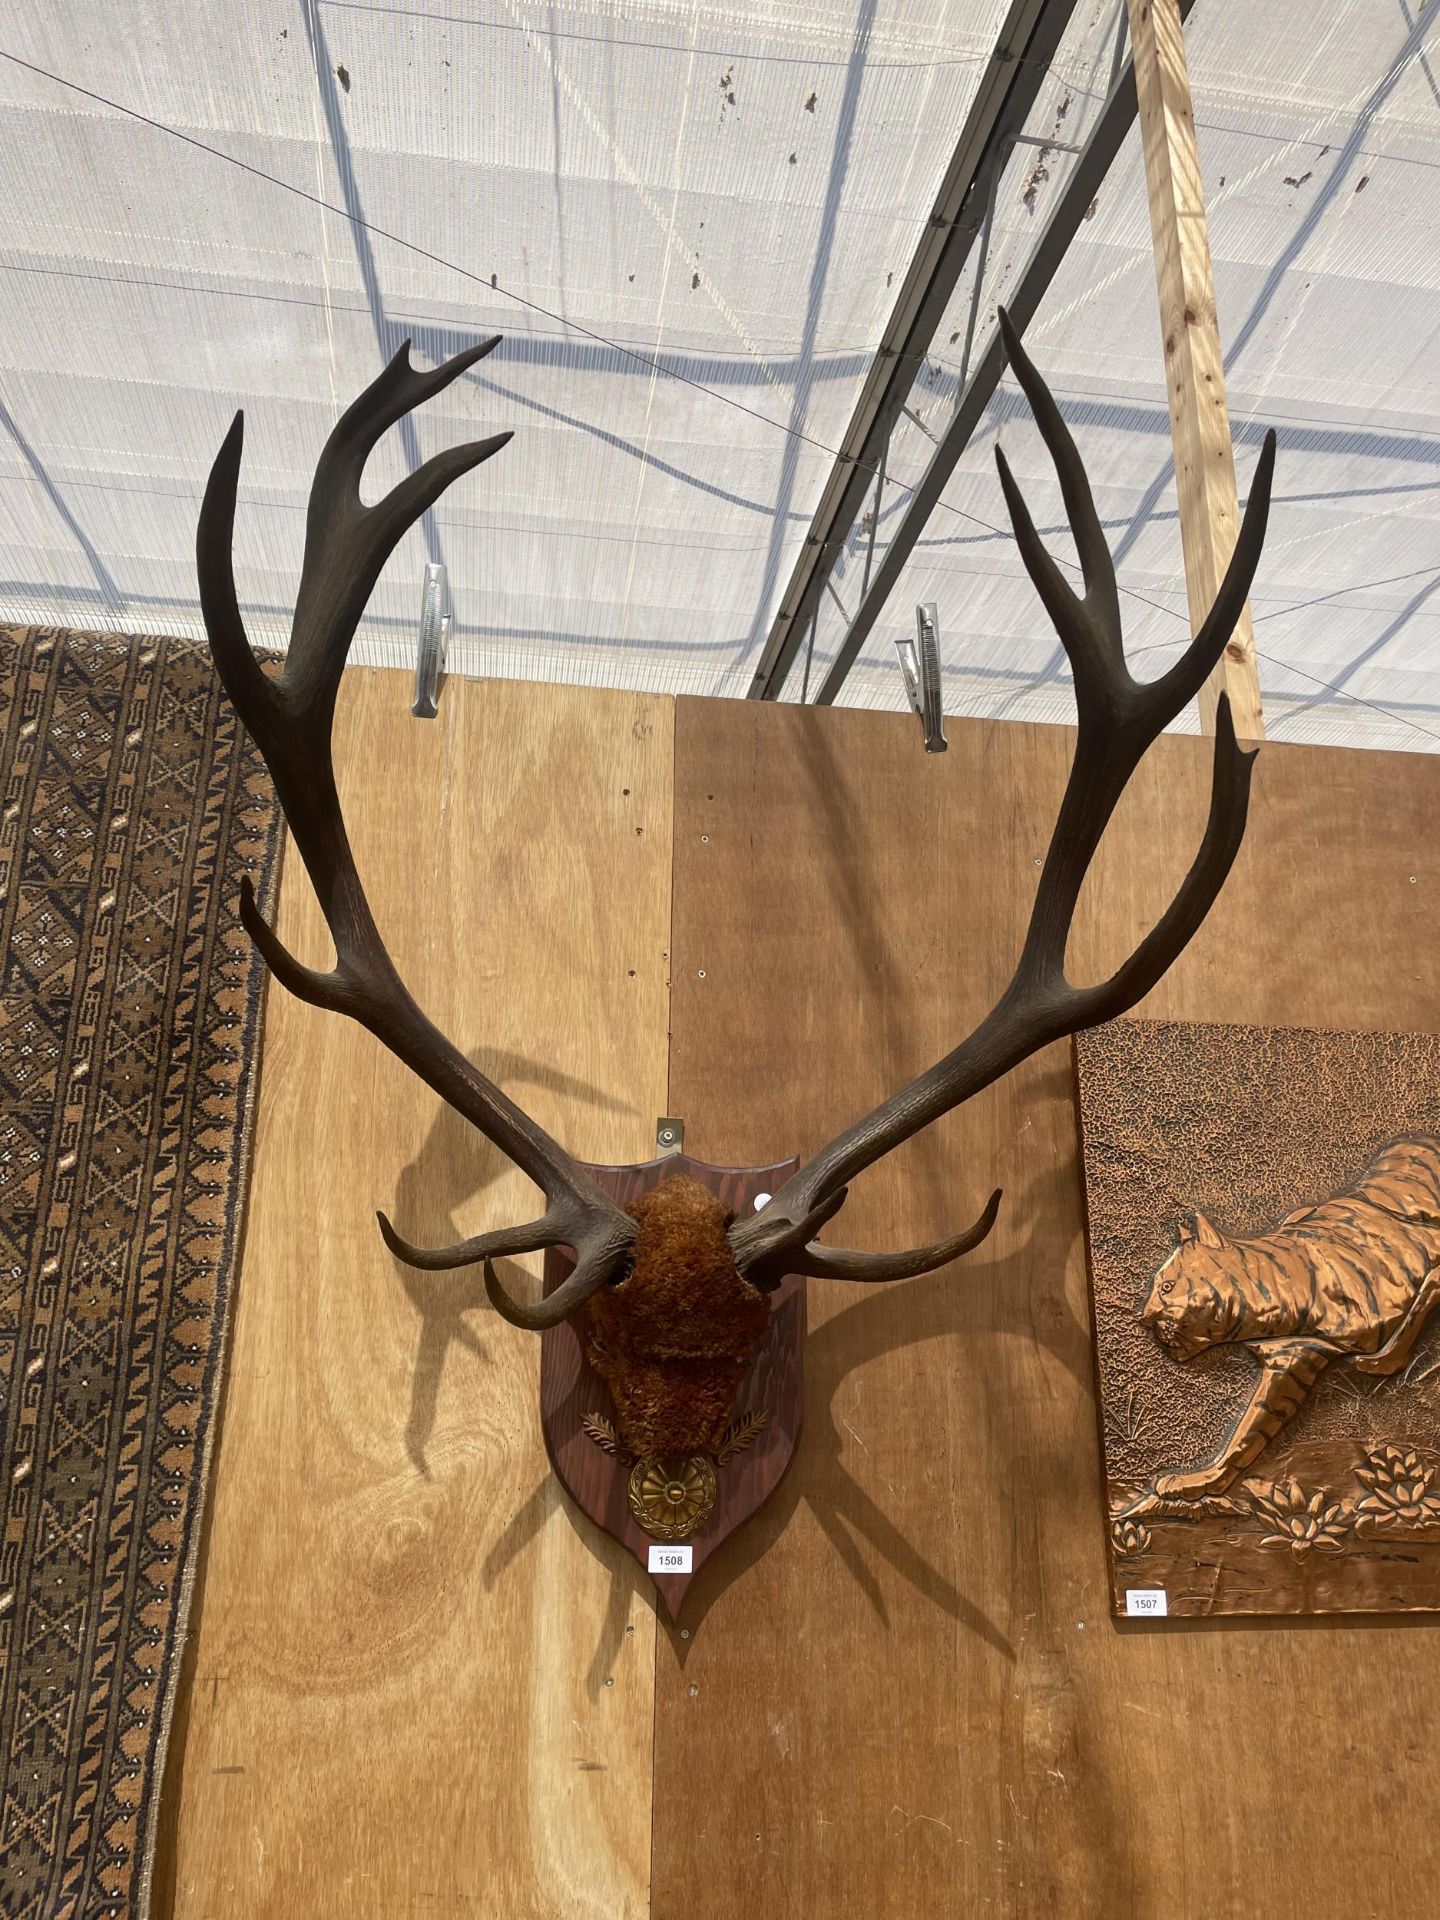 A PAIR OF ANTLERS MOUNTED ON A WOODEN PLINTH